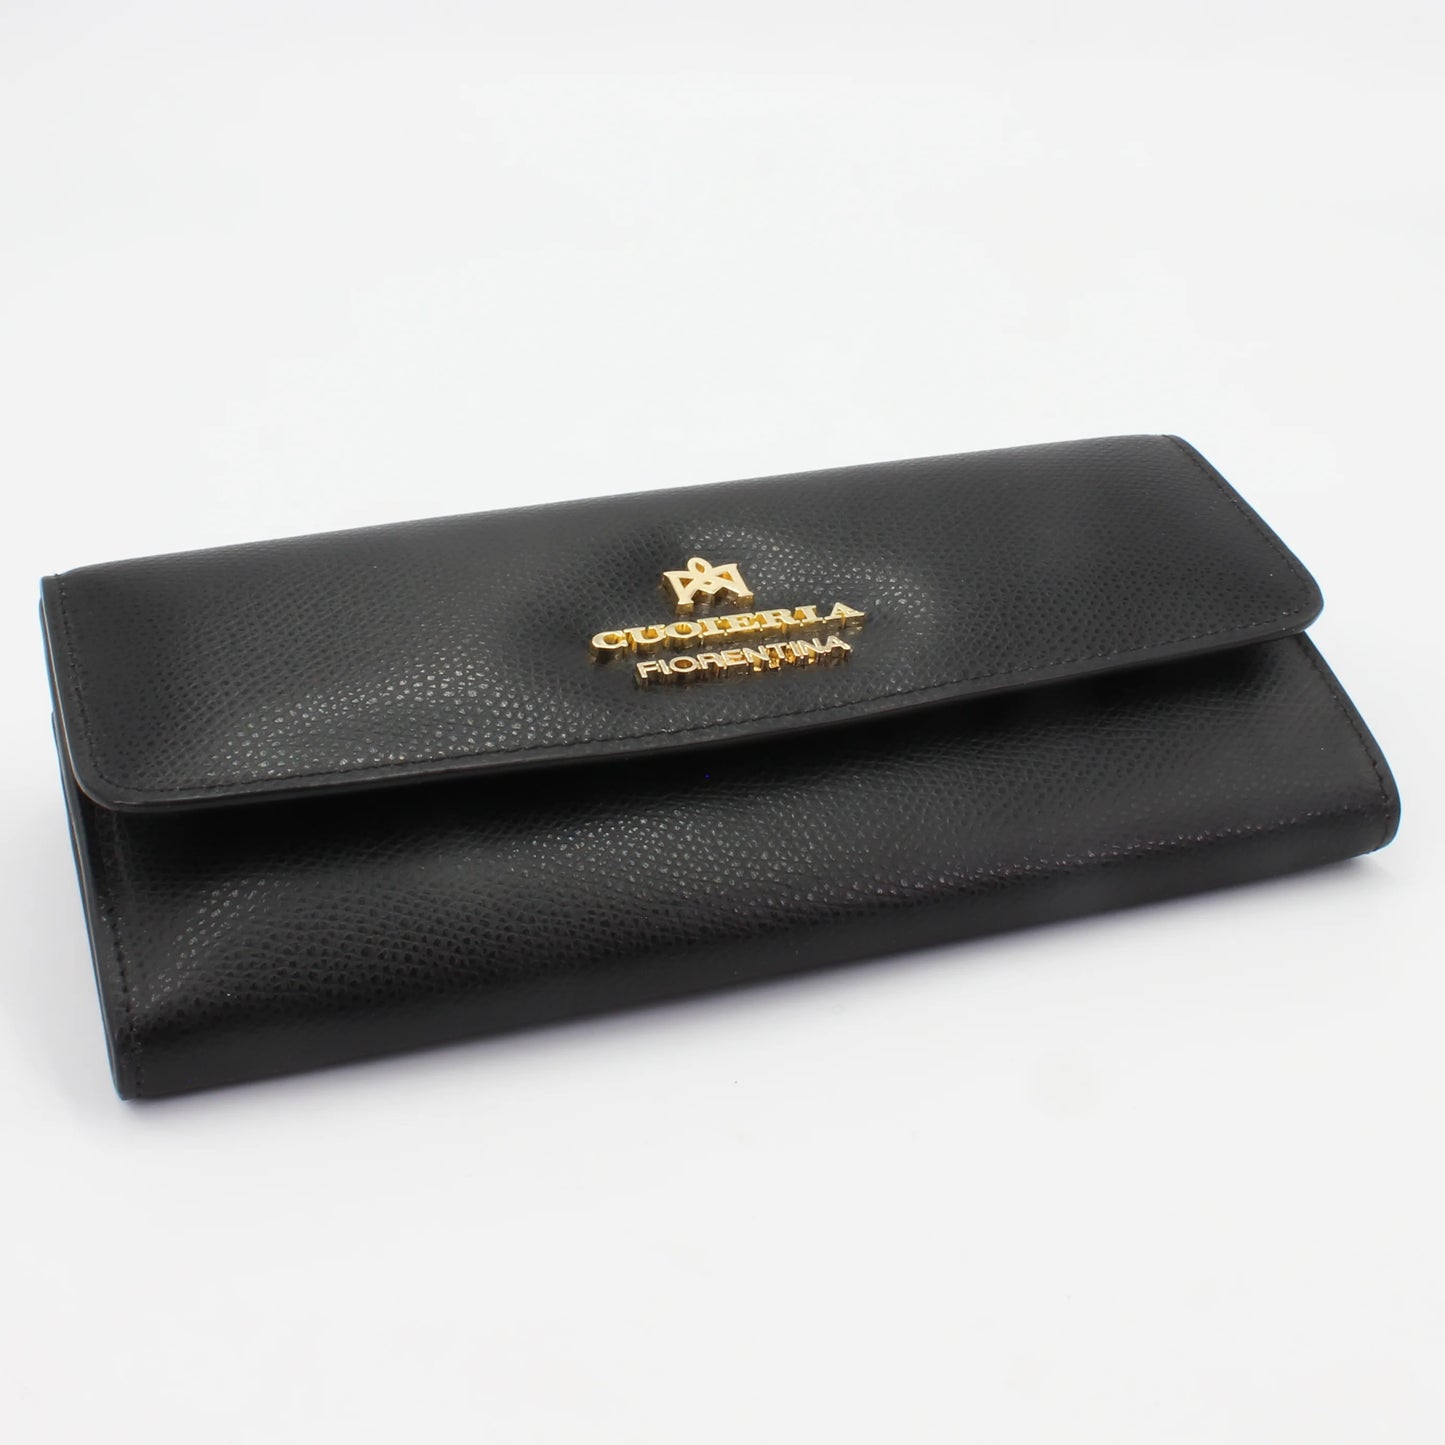 Shop our Italian-made Cuoieria Fiorentina Italian leather purse in nero (P0000D1003420) or browse our range of Italian wallets and purses for men & women in-store at Aliverti Cape Town, or shop online.   We deliver in South Africa & offer multiple payment plans as well as accept multiple safe & secure payment methods.